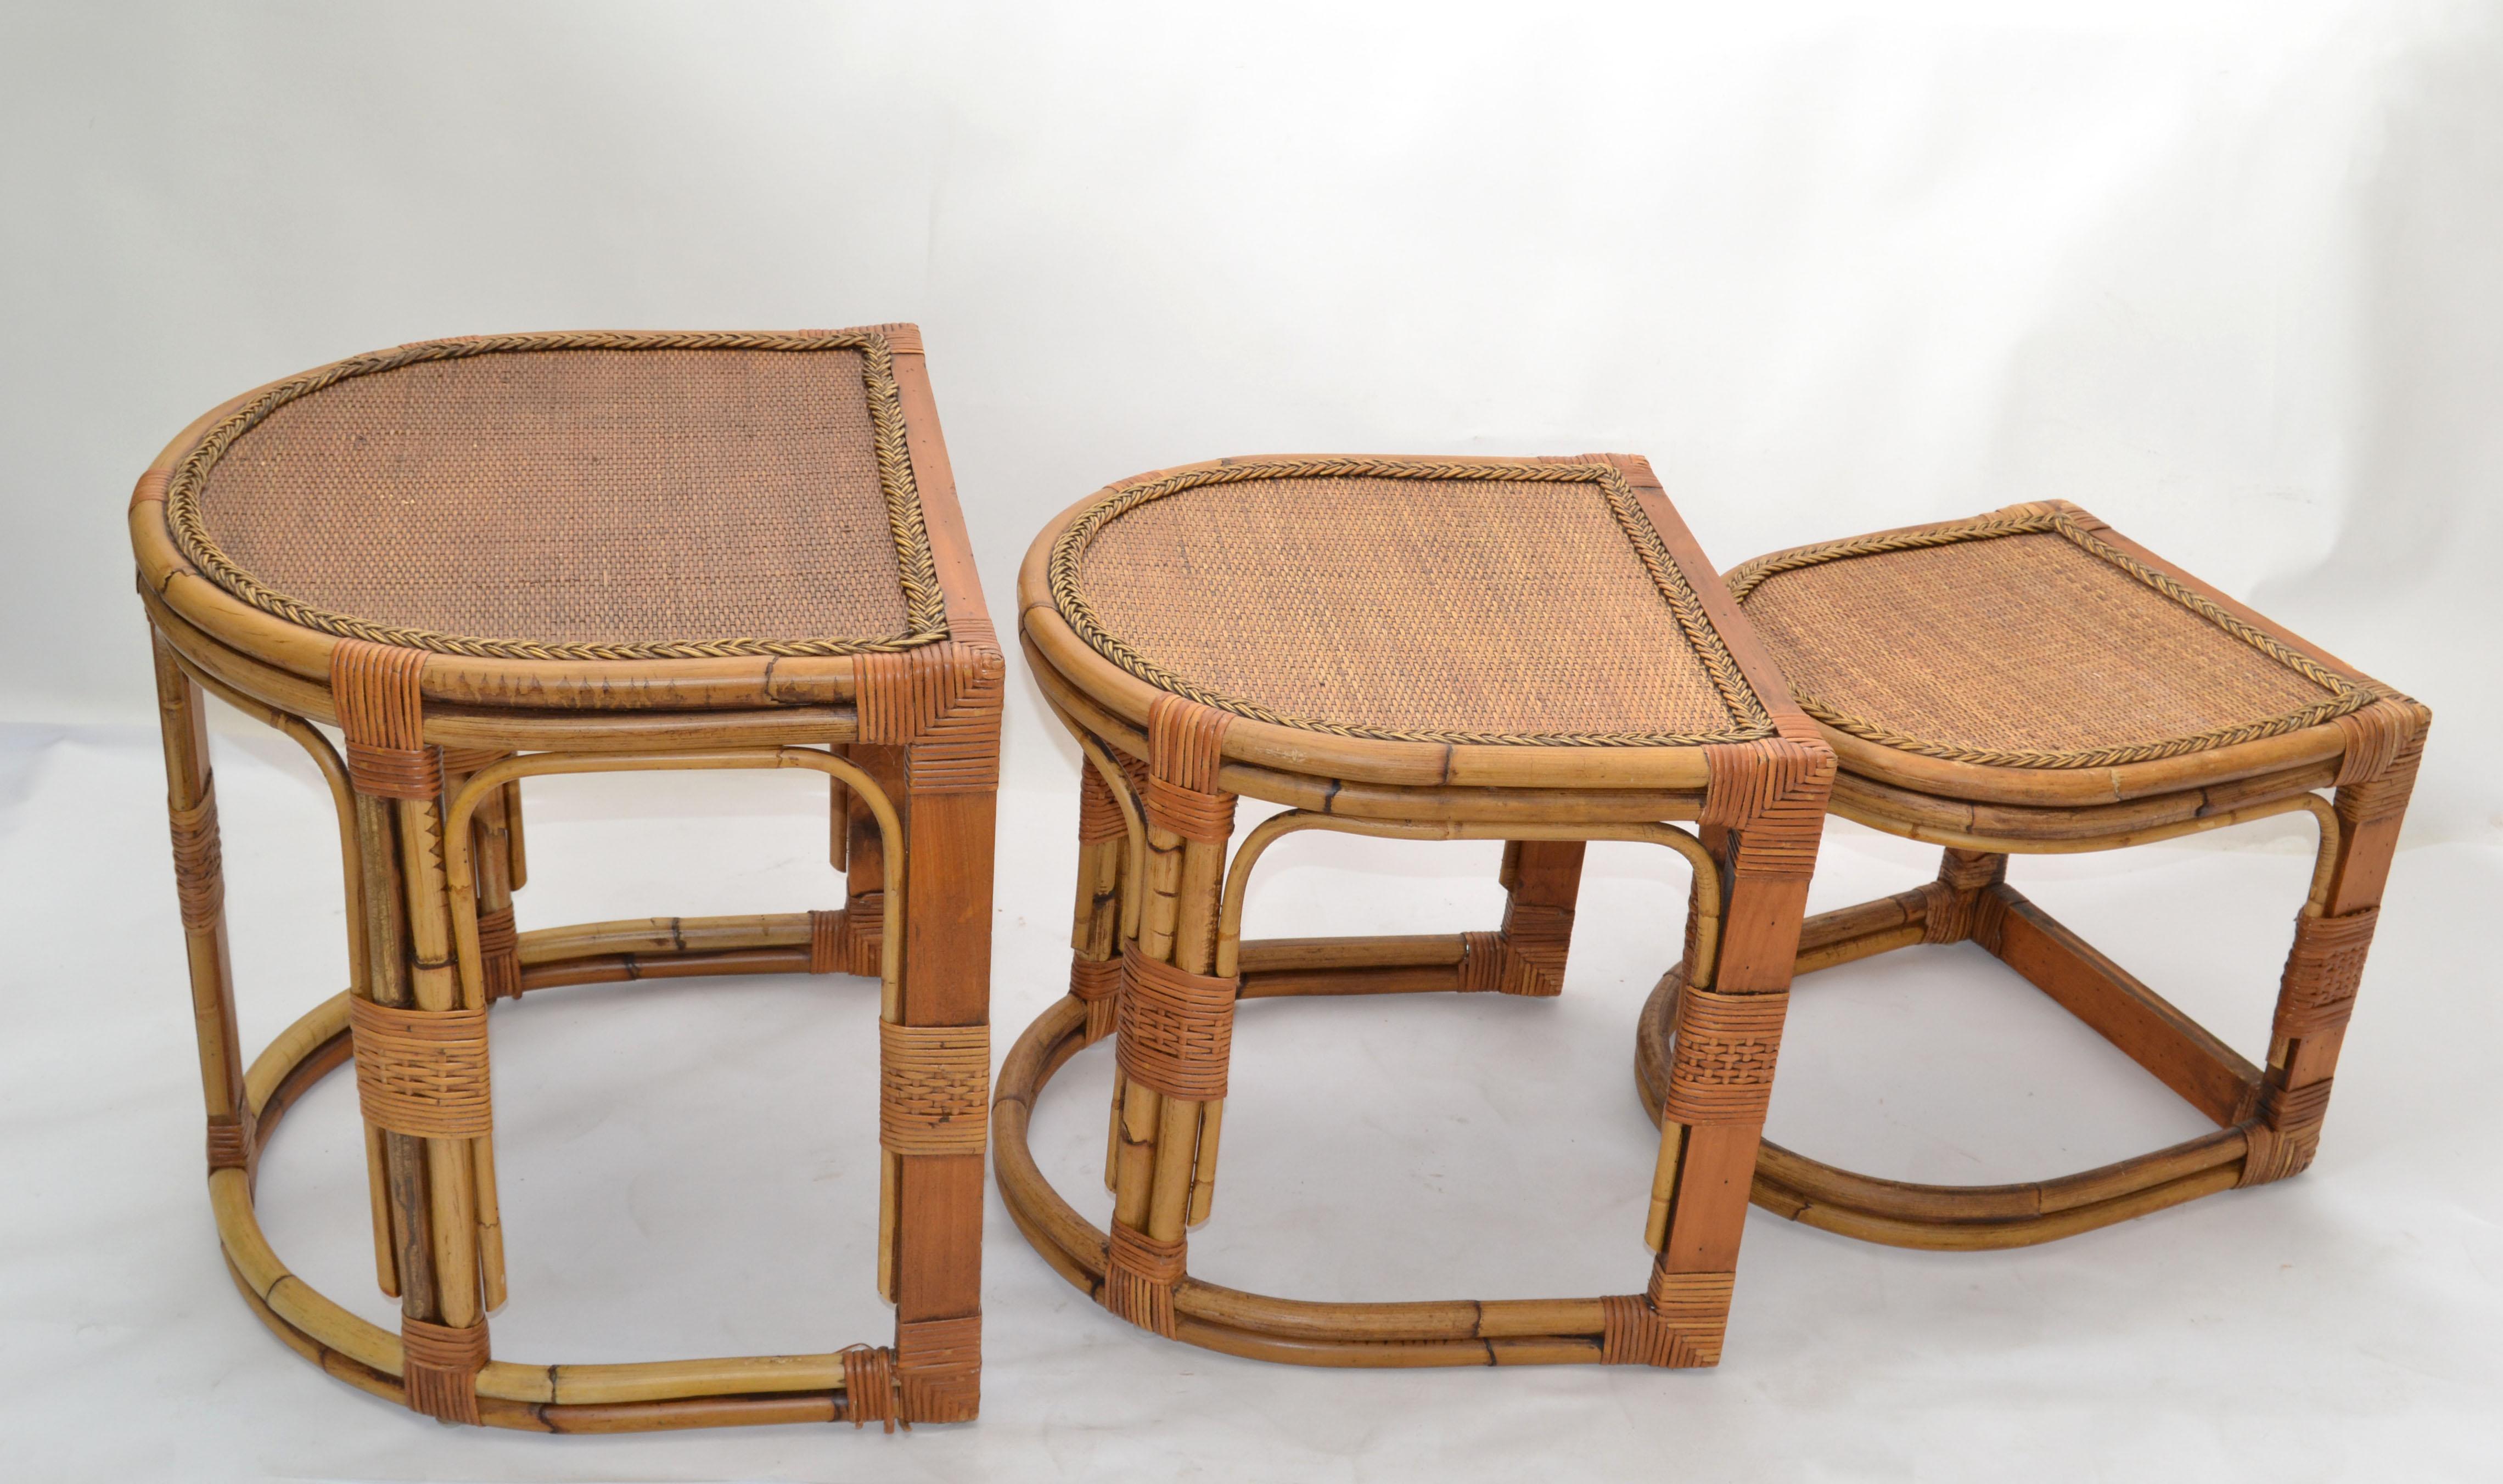 Semi-Circle Bamboo & Cane Nesting Tables / Stacking Tables Handcrafted, Set of 3 In Good Condition For Sale In Miami, FL